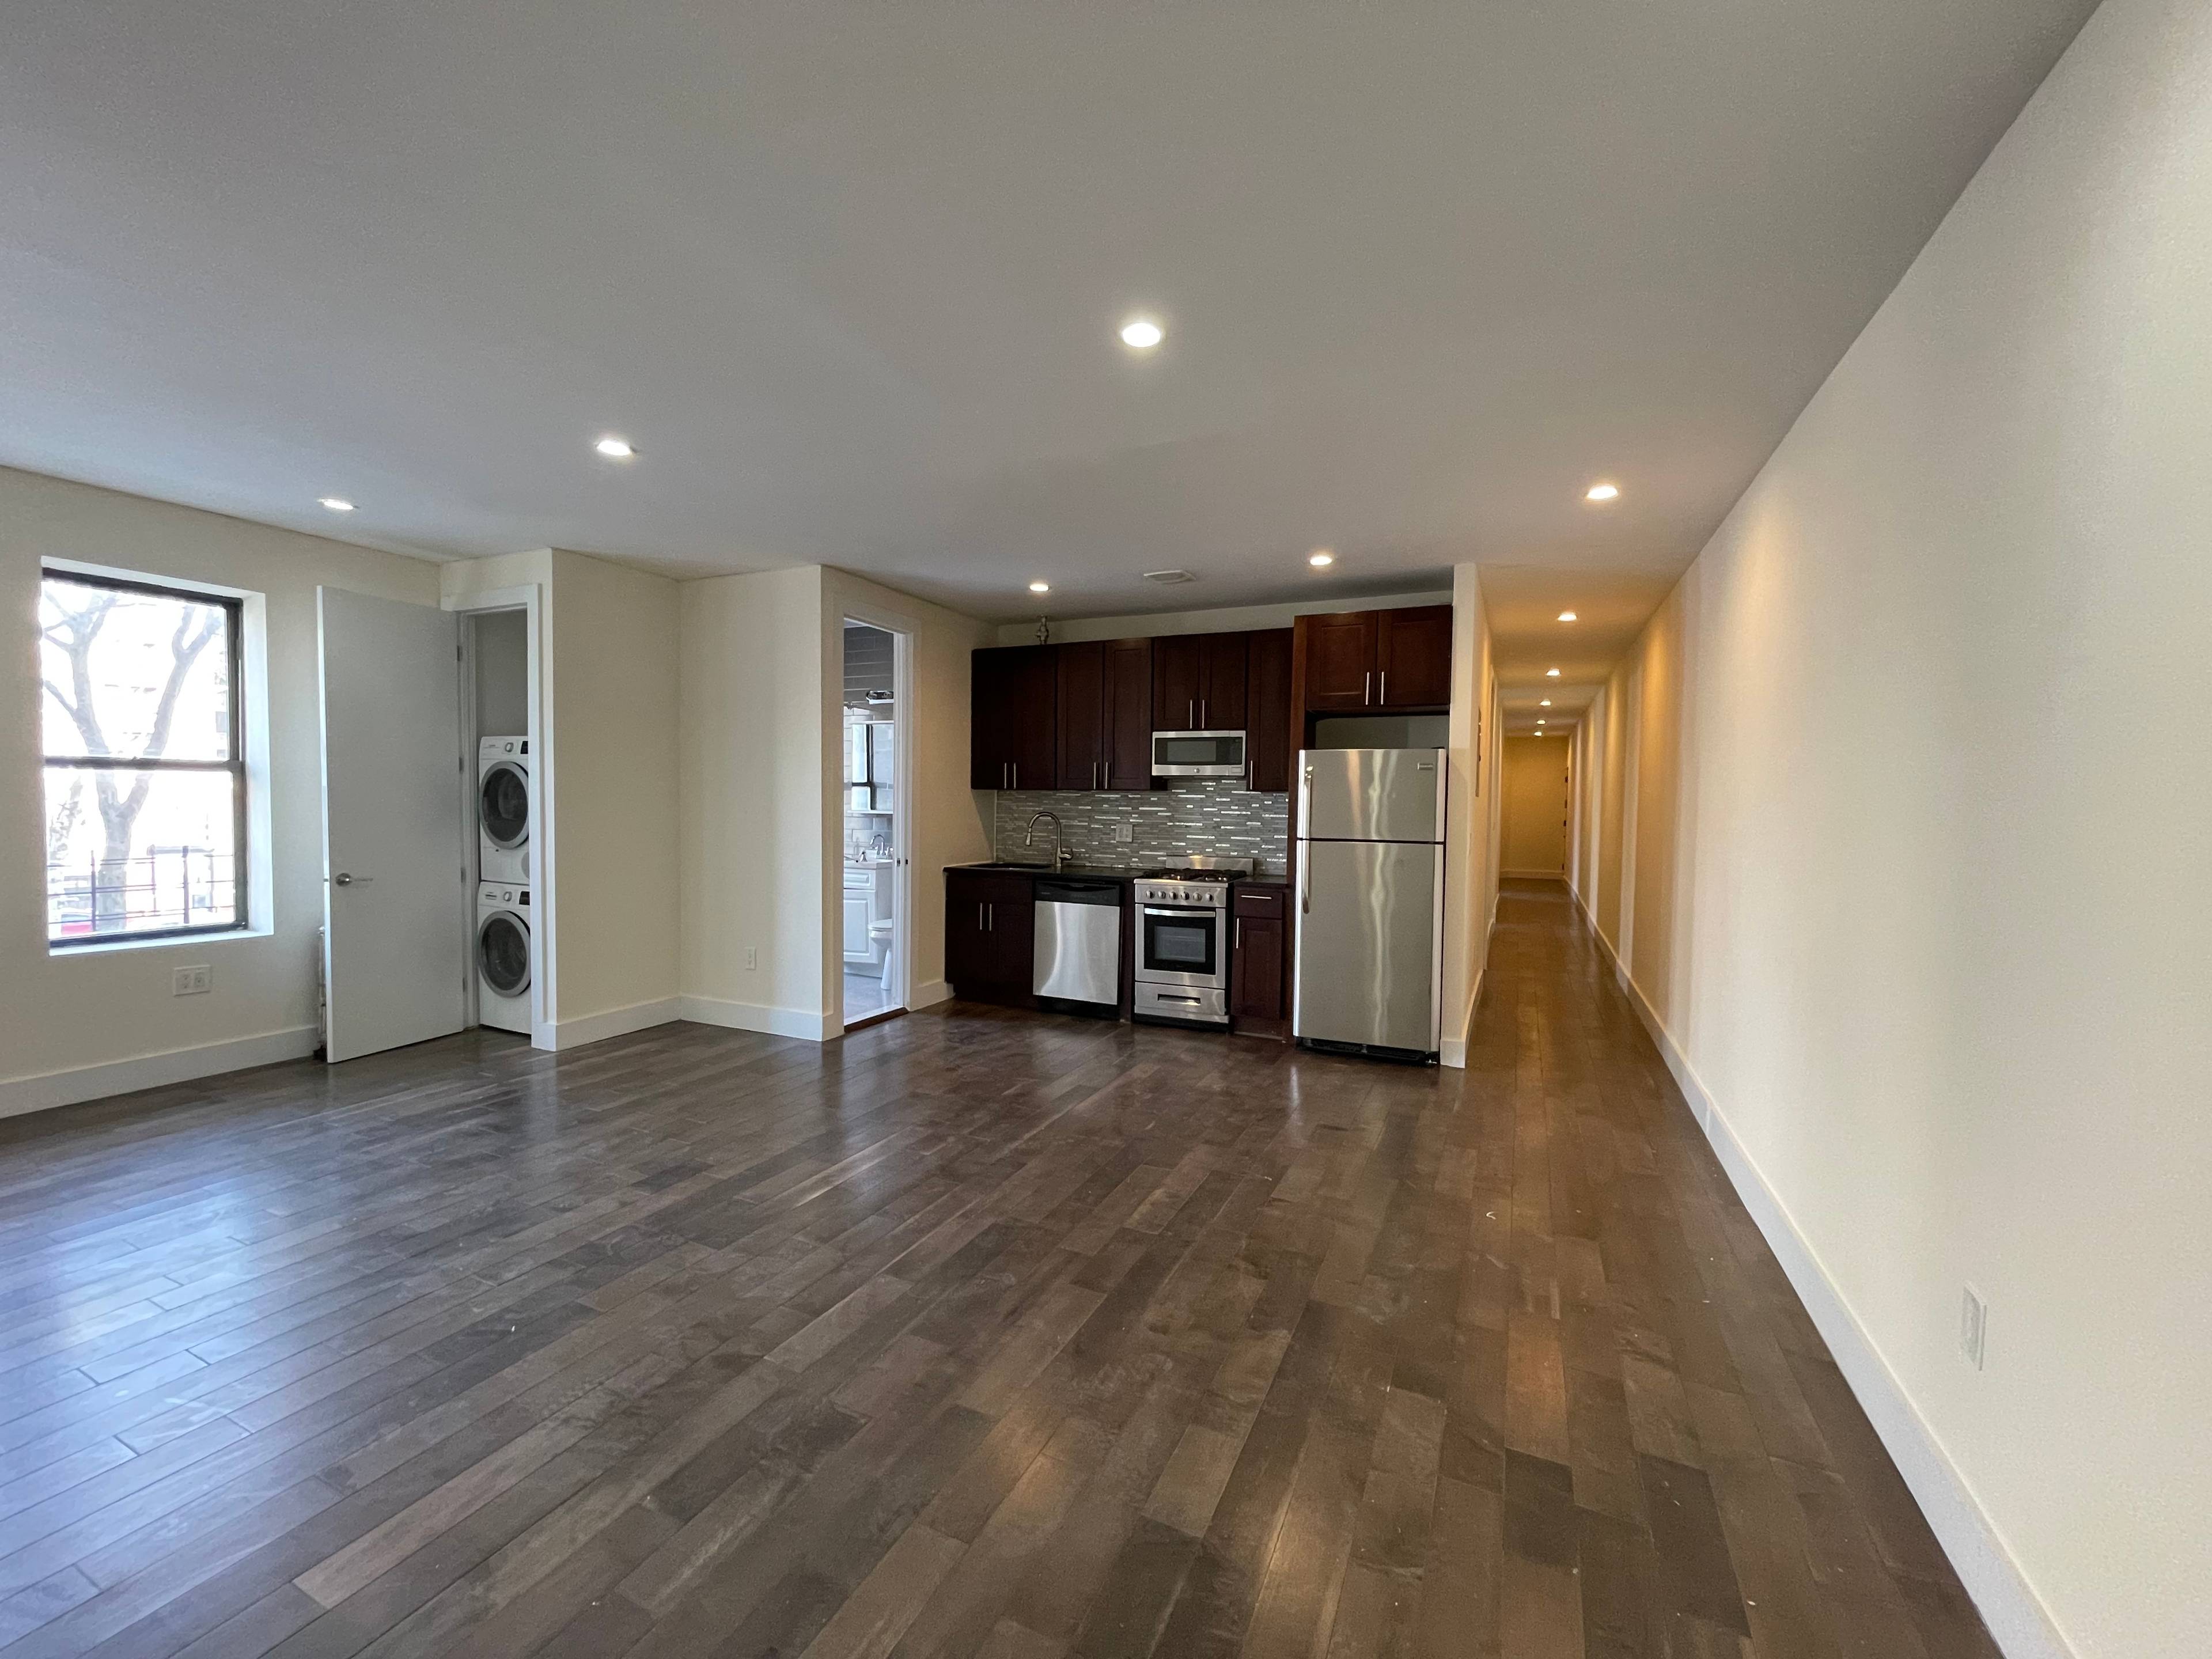 Amazing gut renovated 6 bedroom 2 bath, just steps from NY Presbyterian hospital and easy access to all major transportationCondo finishes stainless steel appliances, custom cabinets and counter tops, new ...